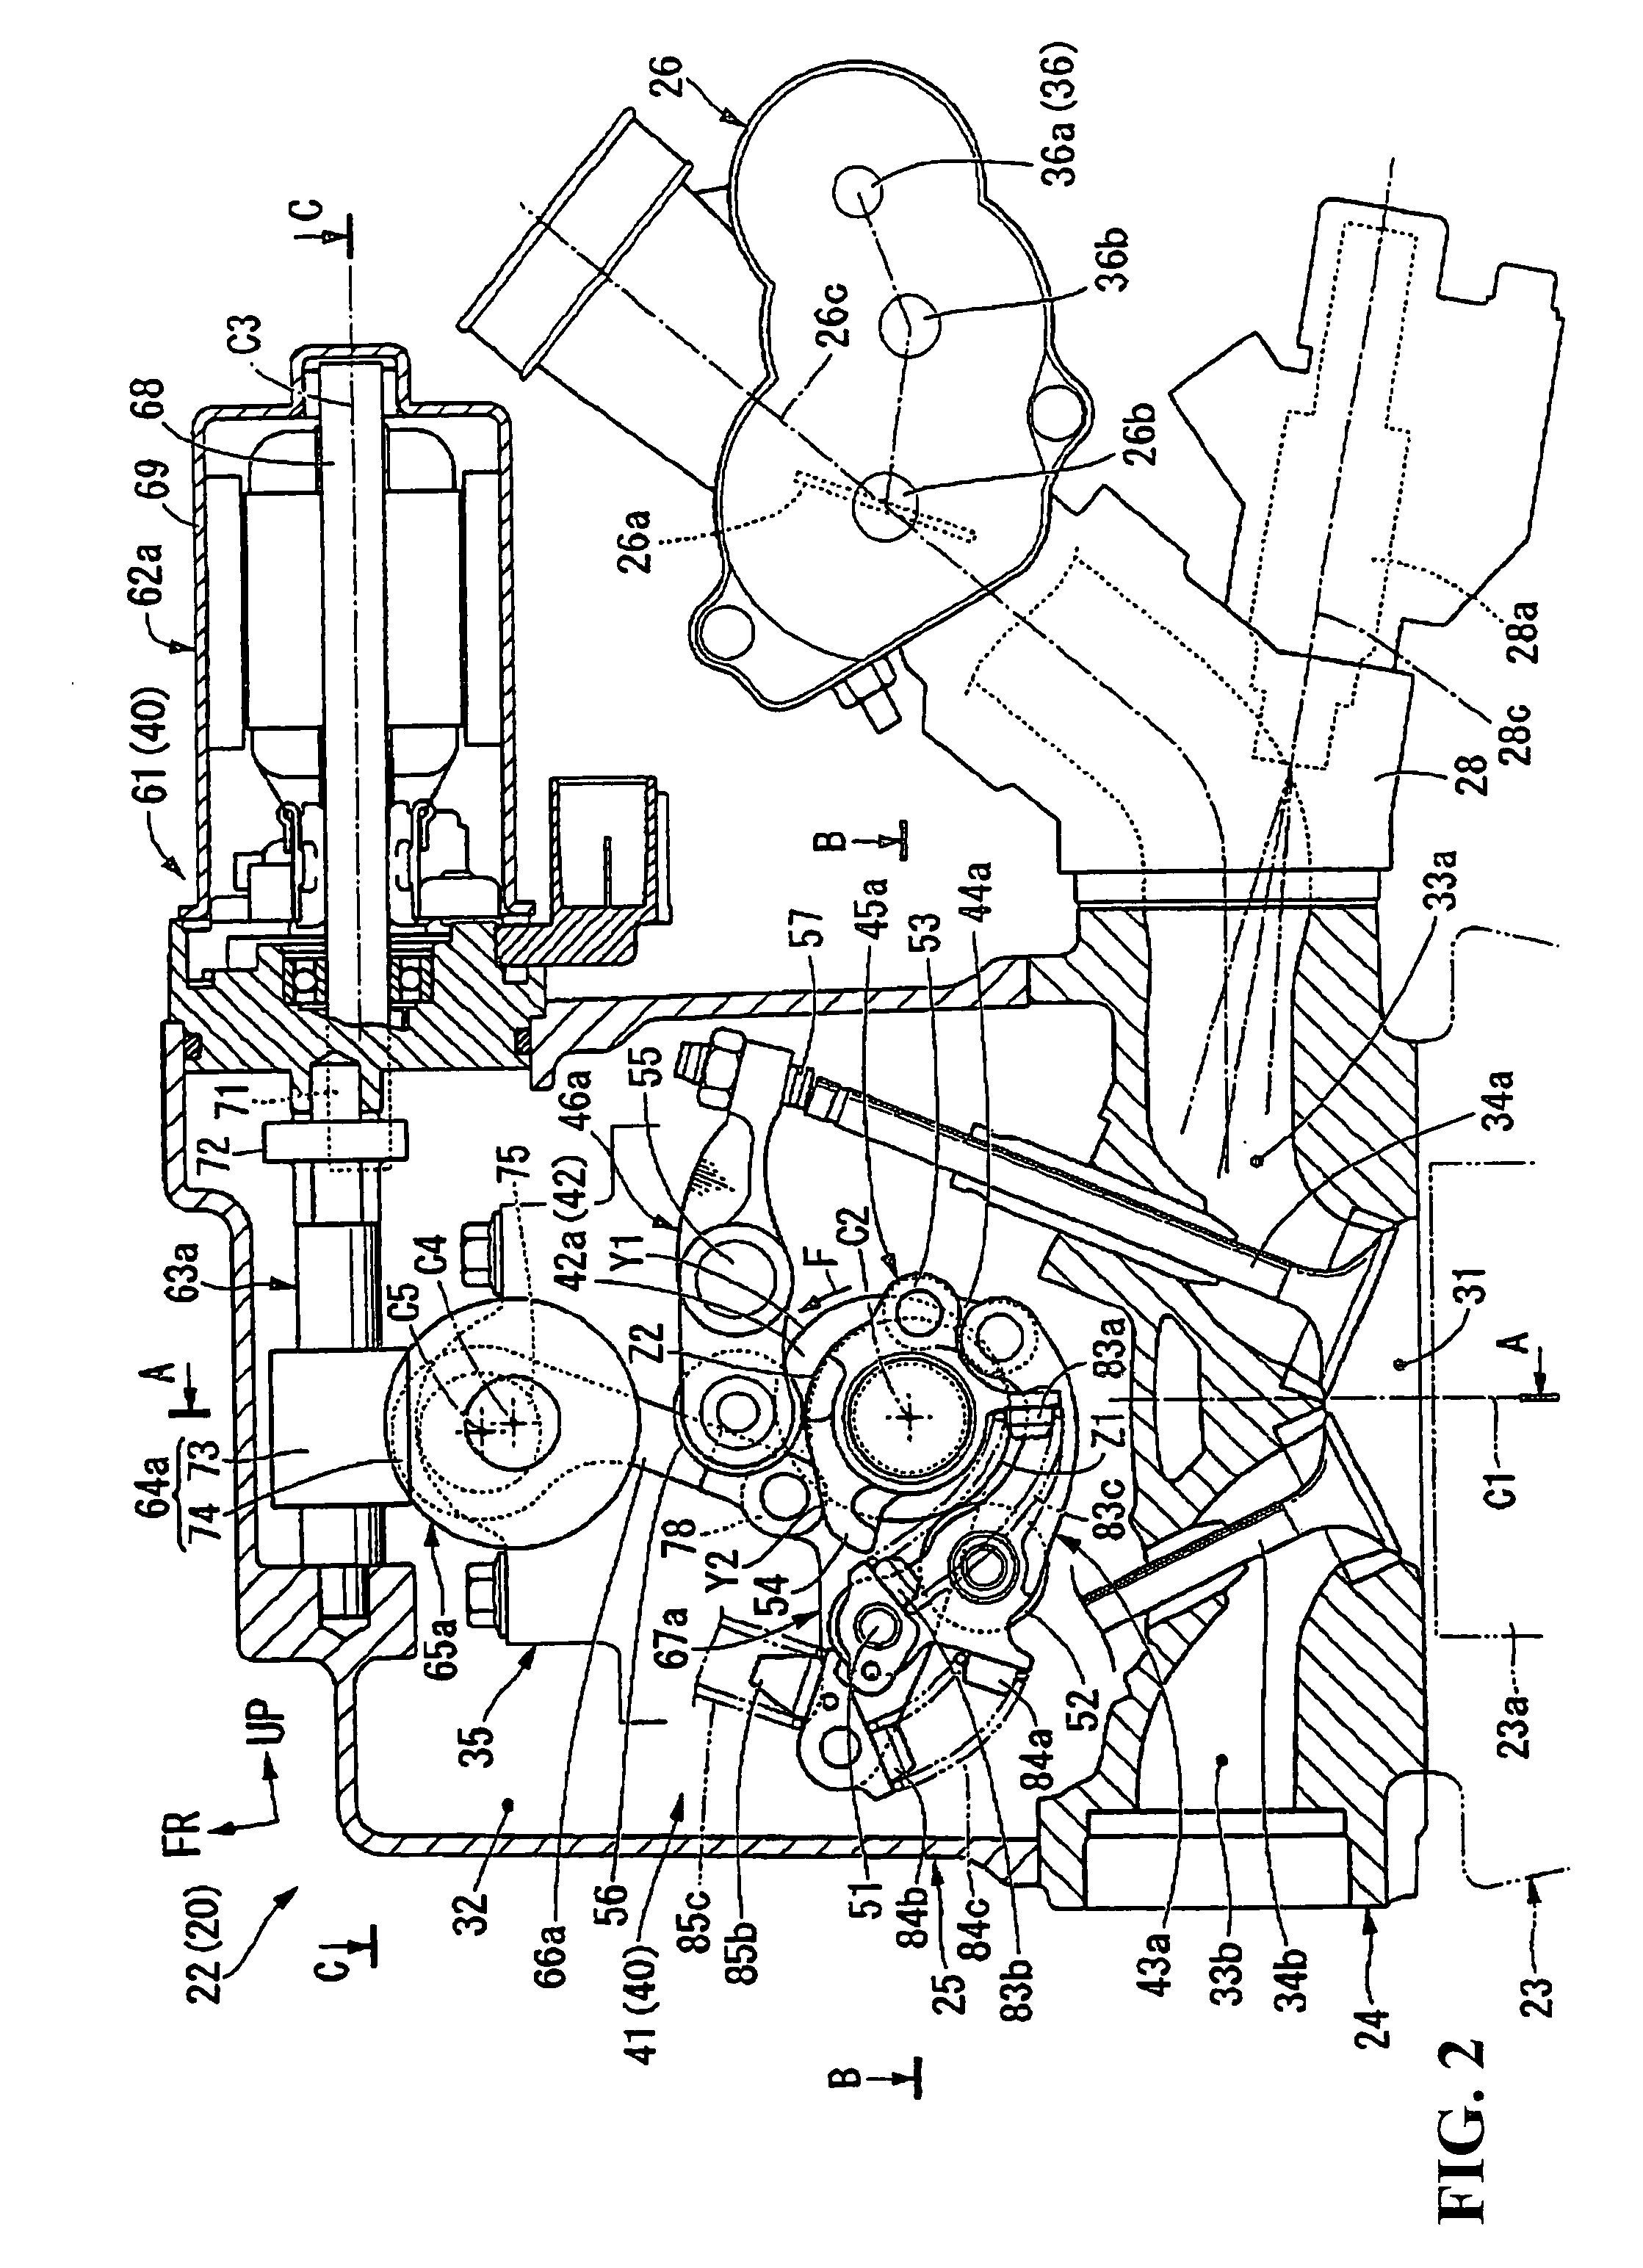 Internal combustion engine having variable valve operating device